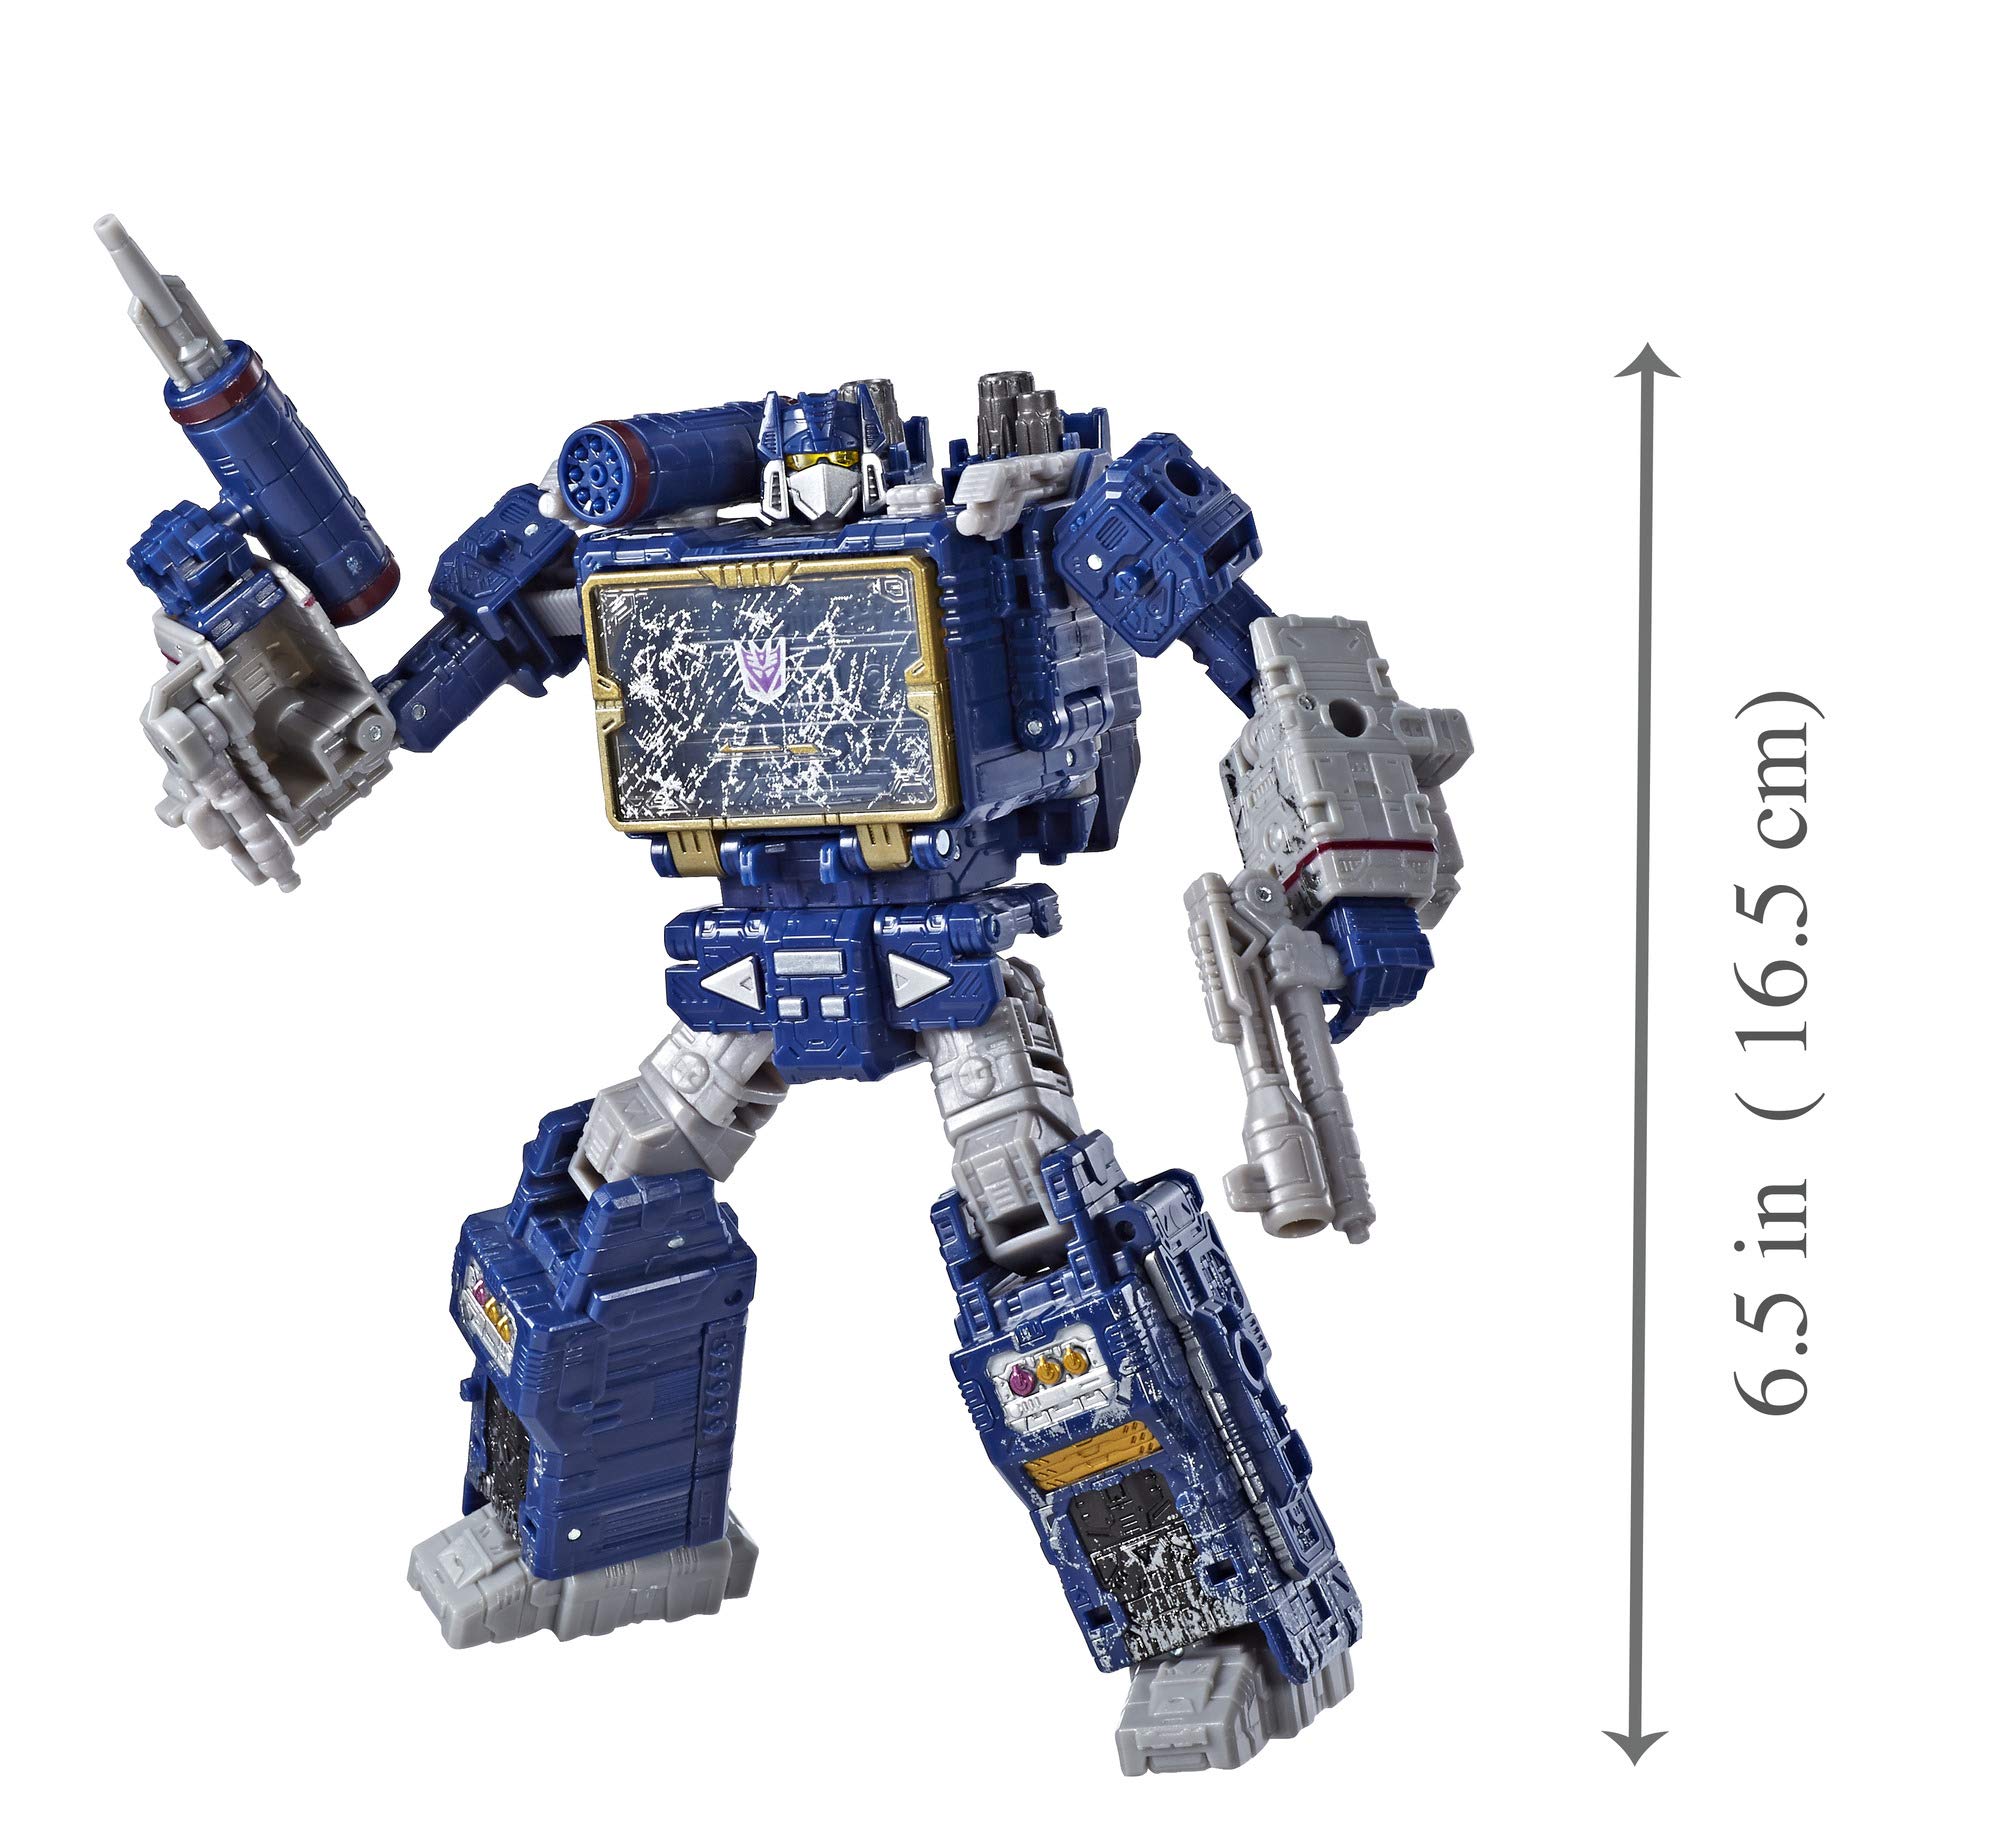 Transformers Toys Generations War for Cybertron Voyager Wfc-S25 Soundwave Action Figure - Siege Chapter - Adults & Kids Ages 8 & Up, 7